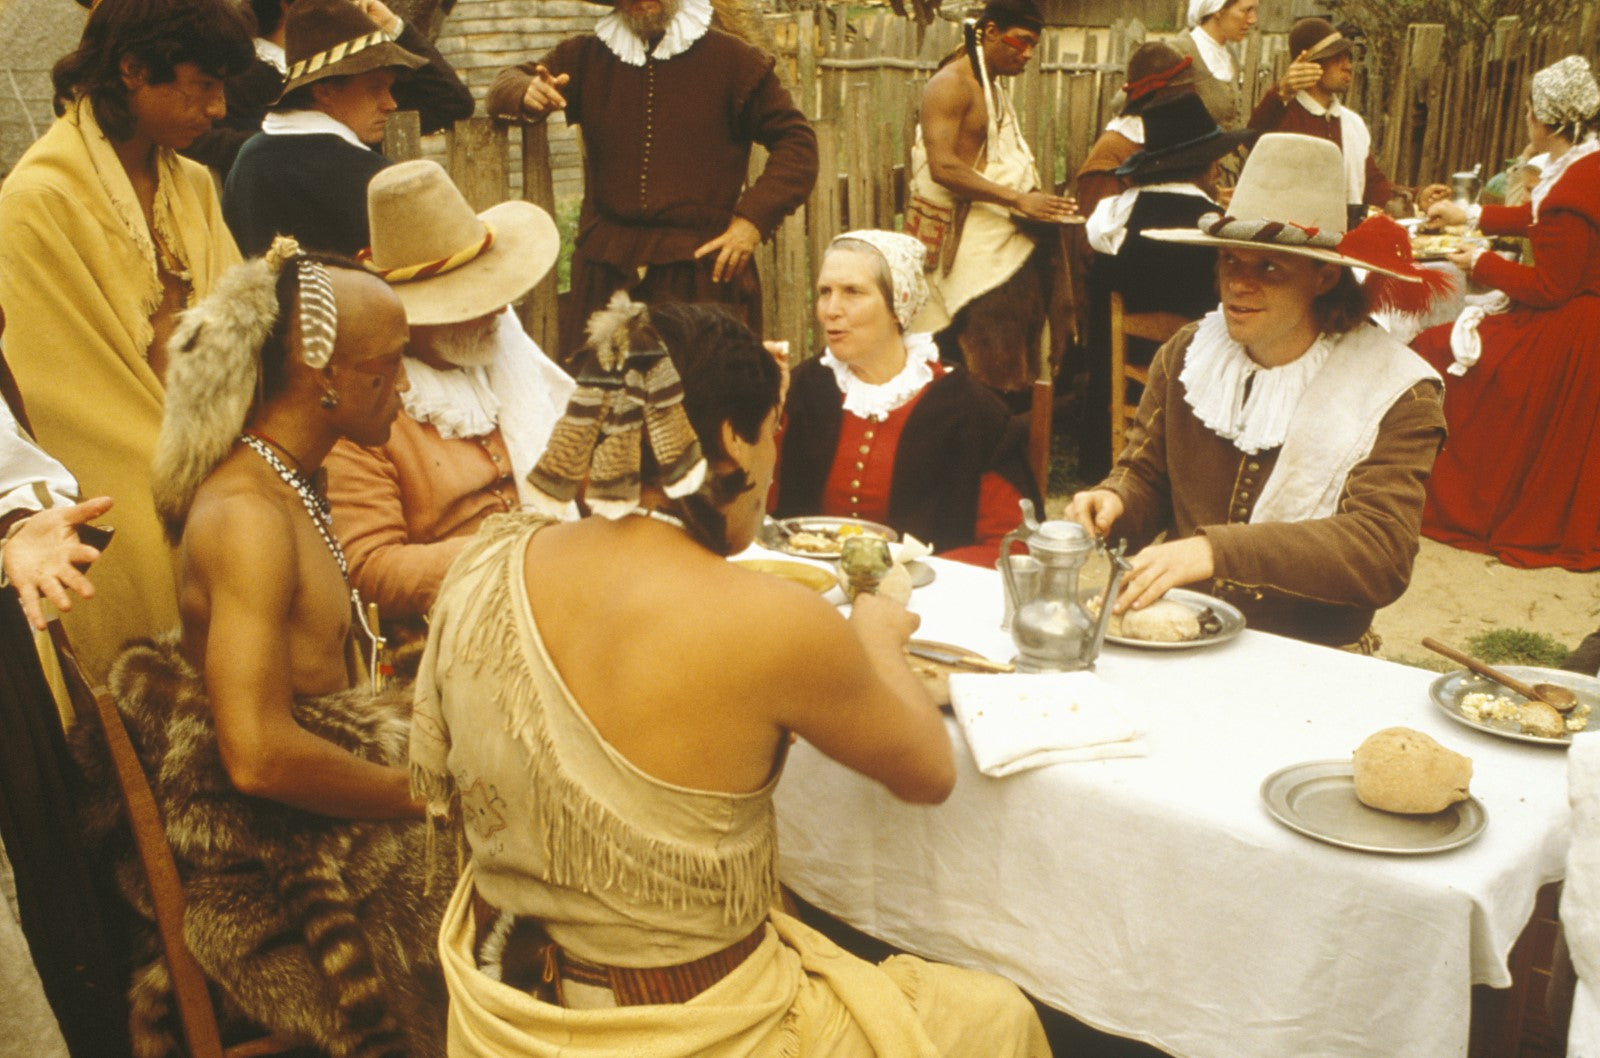 What was the first Thanksgiving like for the Pilgrims?